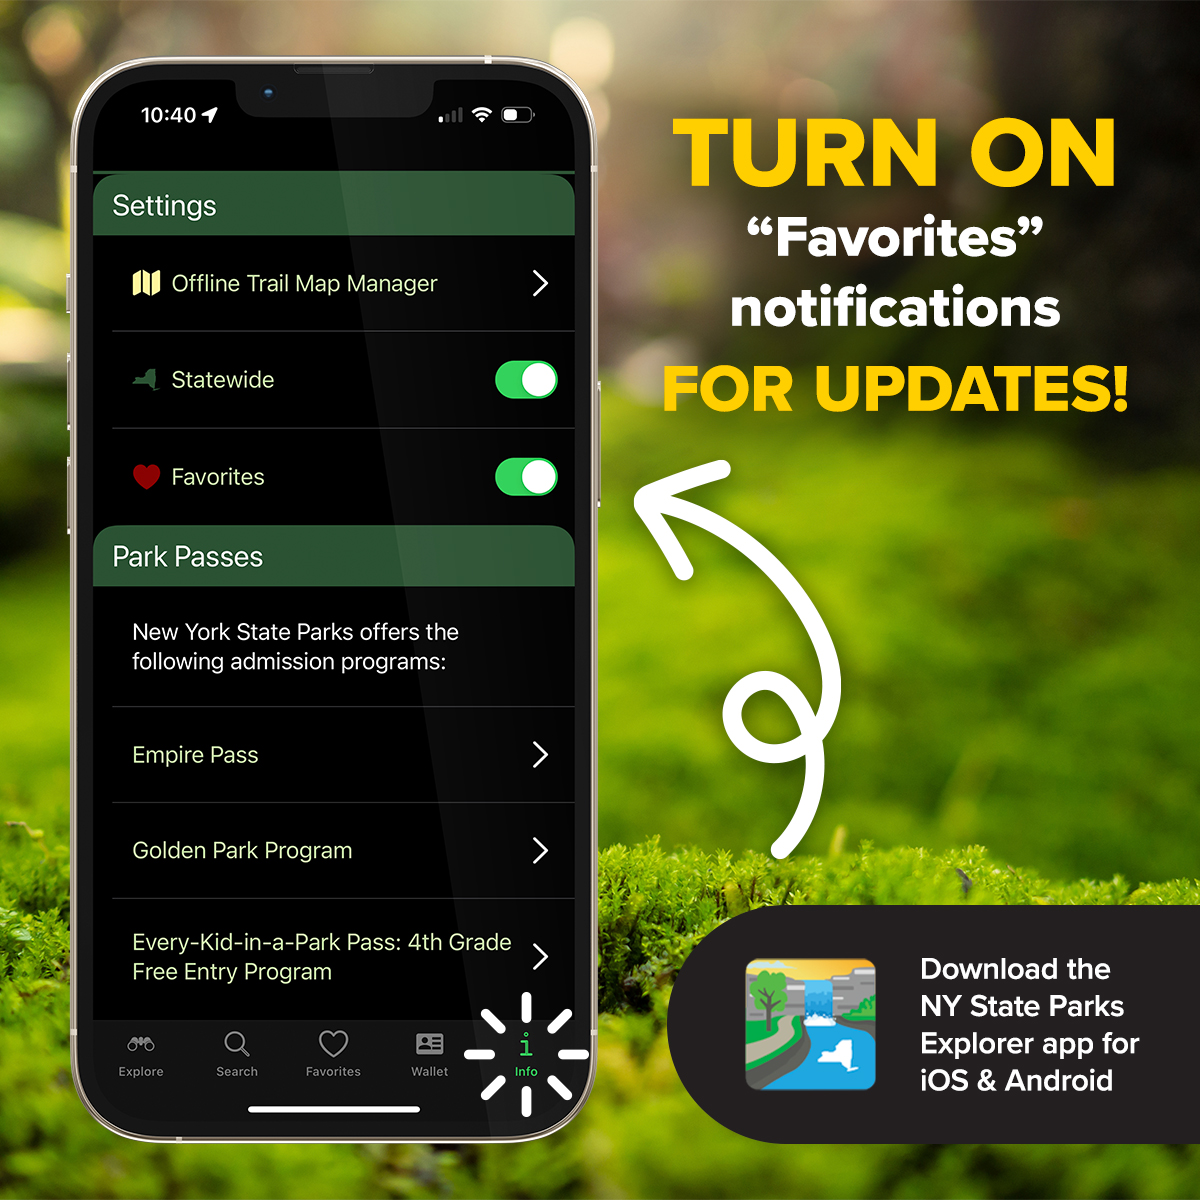 Tomorrow is the big day! To get Eclipse Day updates in real time, download the NY State Parks Explorer App. Favorite the park you'll visit. Then, tap on info ('i') in the lower right corner and toggle “Statewide” and “Favorites” to ON. They should be green to get notifications.